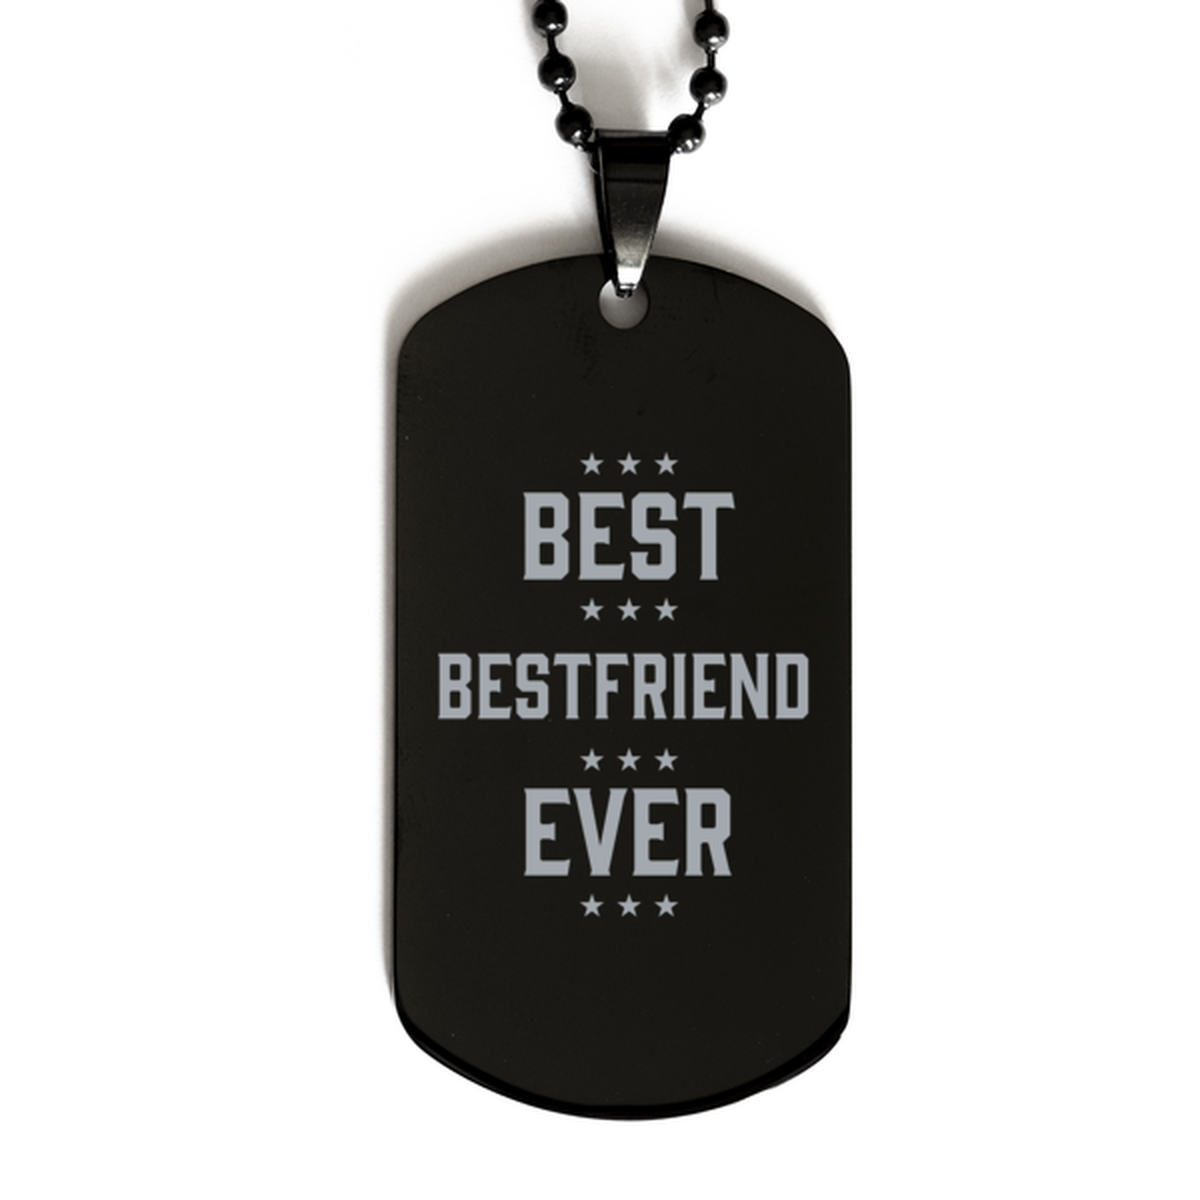 Best Bestfriend Ever Bestfriend Gifts, Funny Black Dog Tag For Bestfriend, Birthday Family Presents Engraved Necklace For Men Women